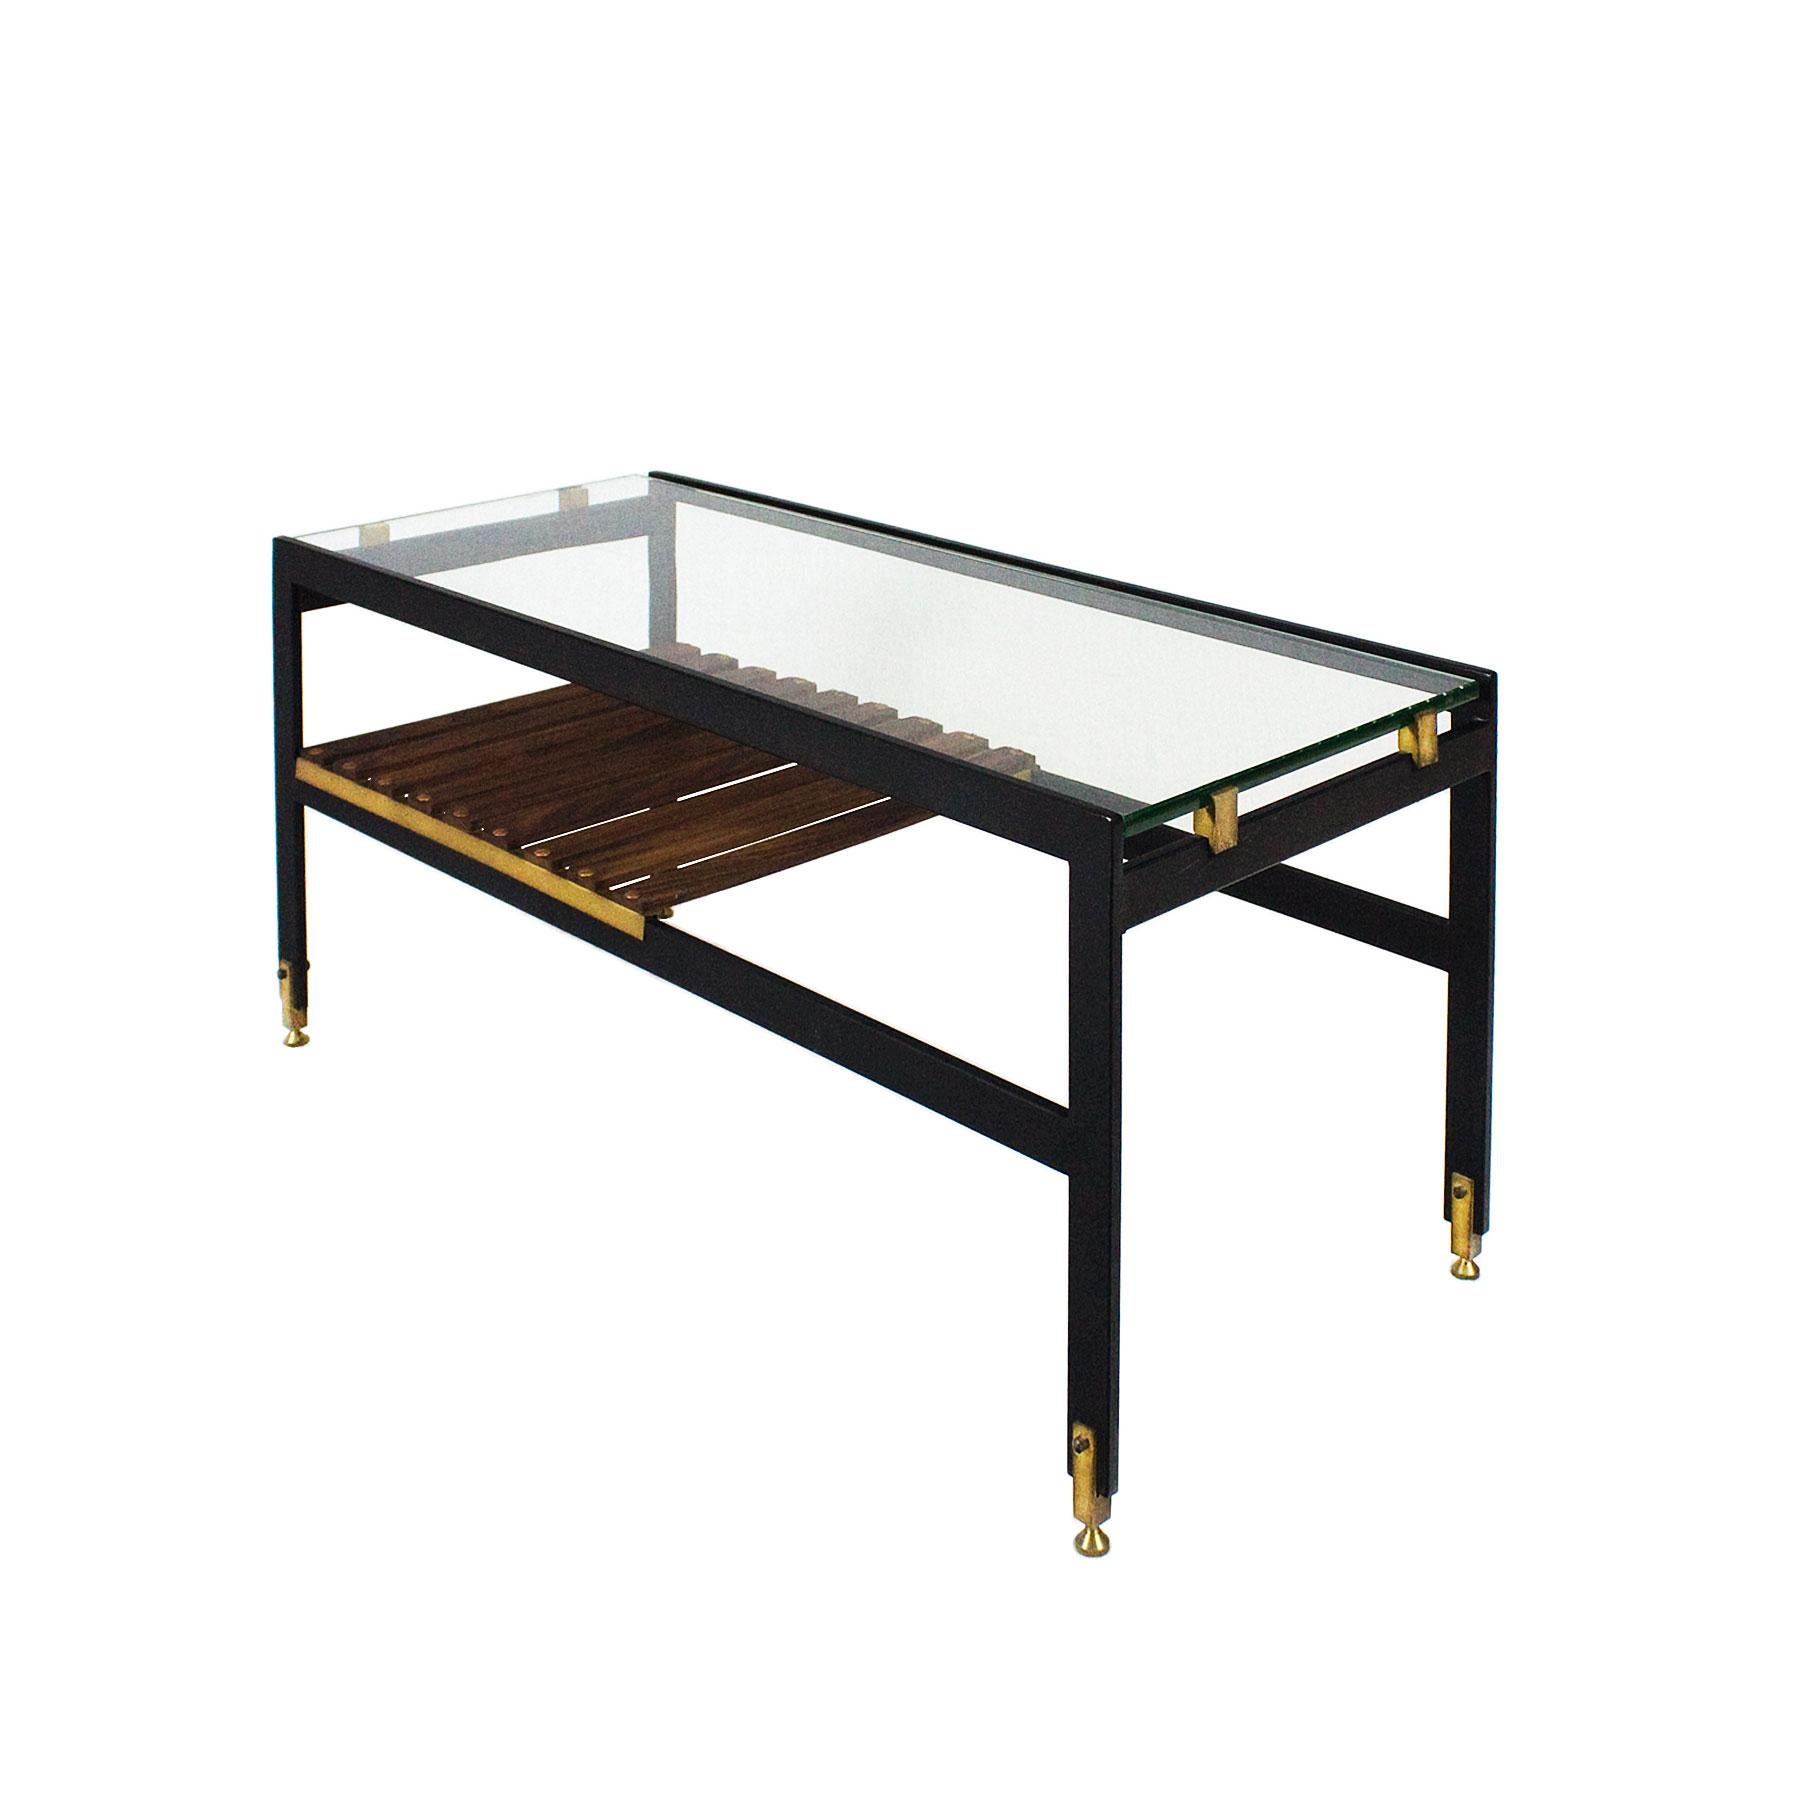 Coffee table, blackened steel, polished brass, solid wenge slats, thick glass on top. High quality.

Italy, circa 1950.